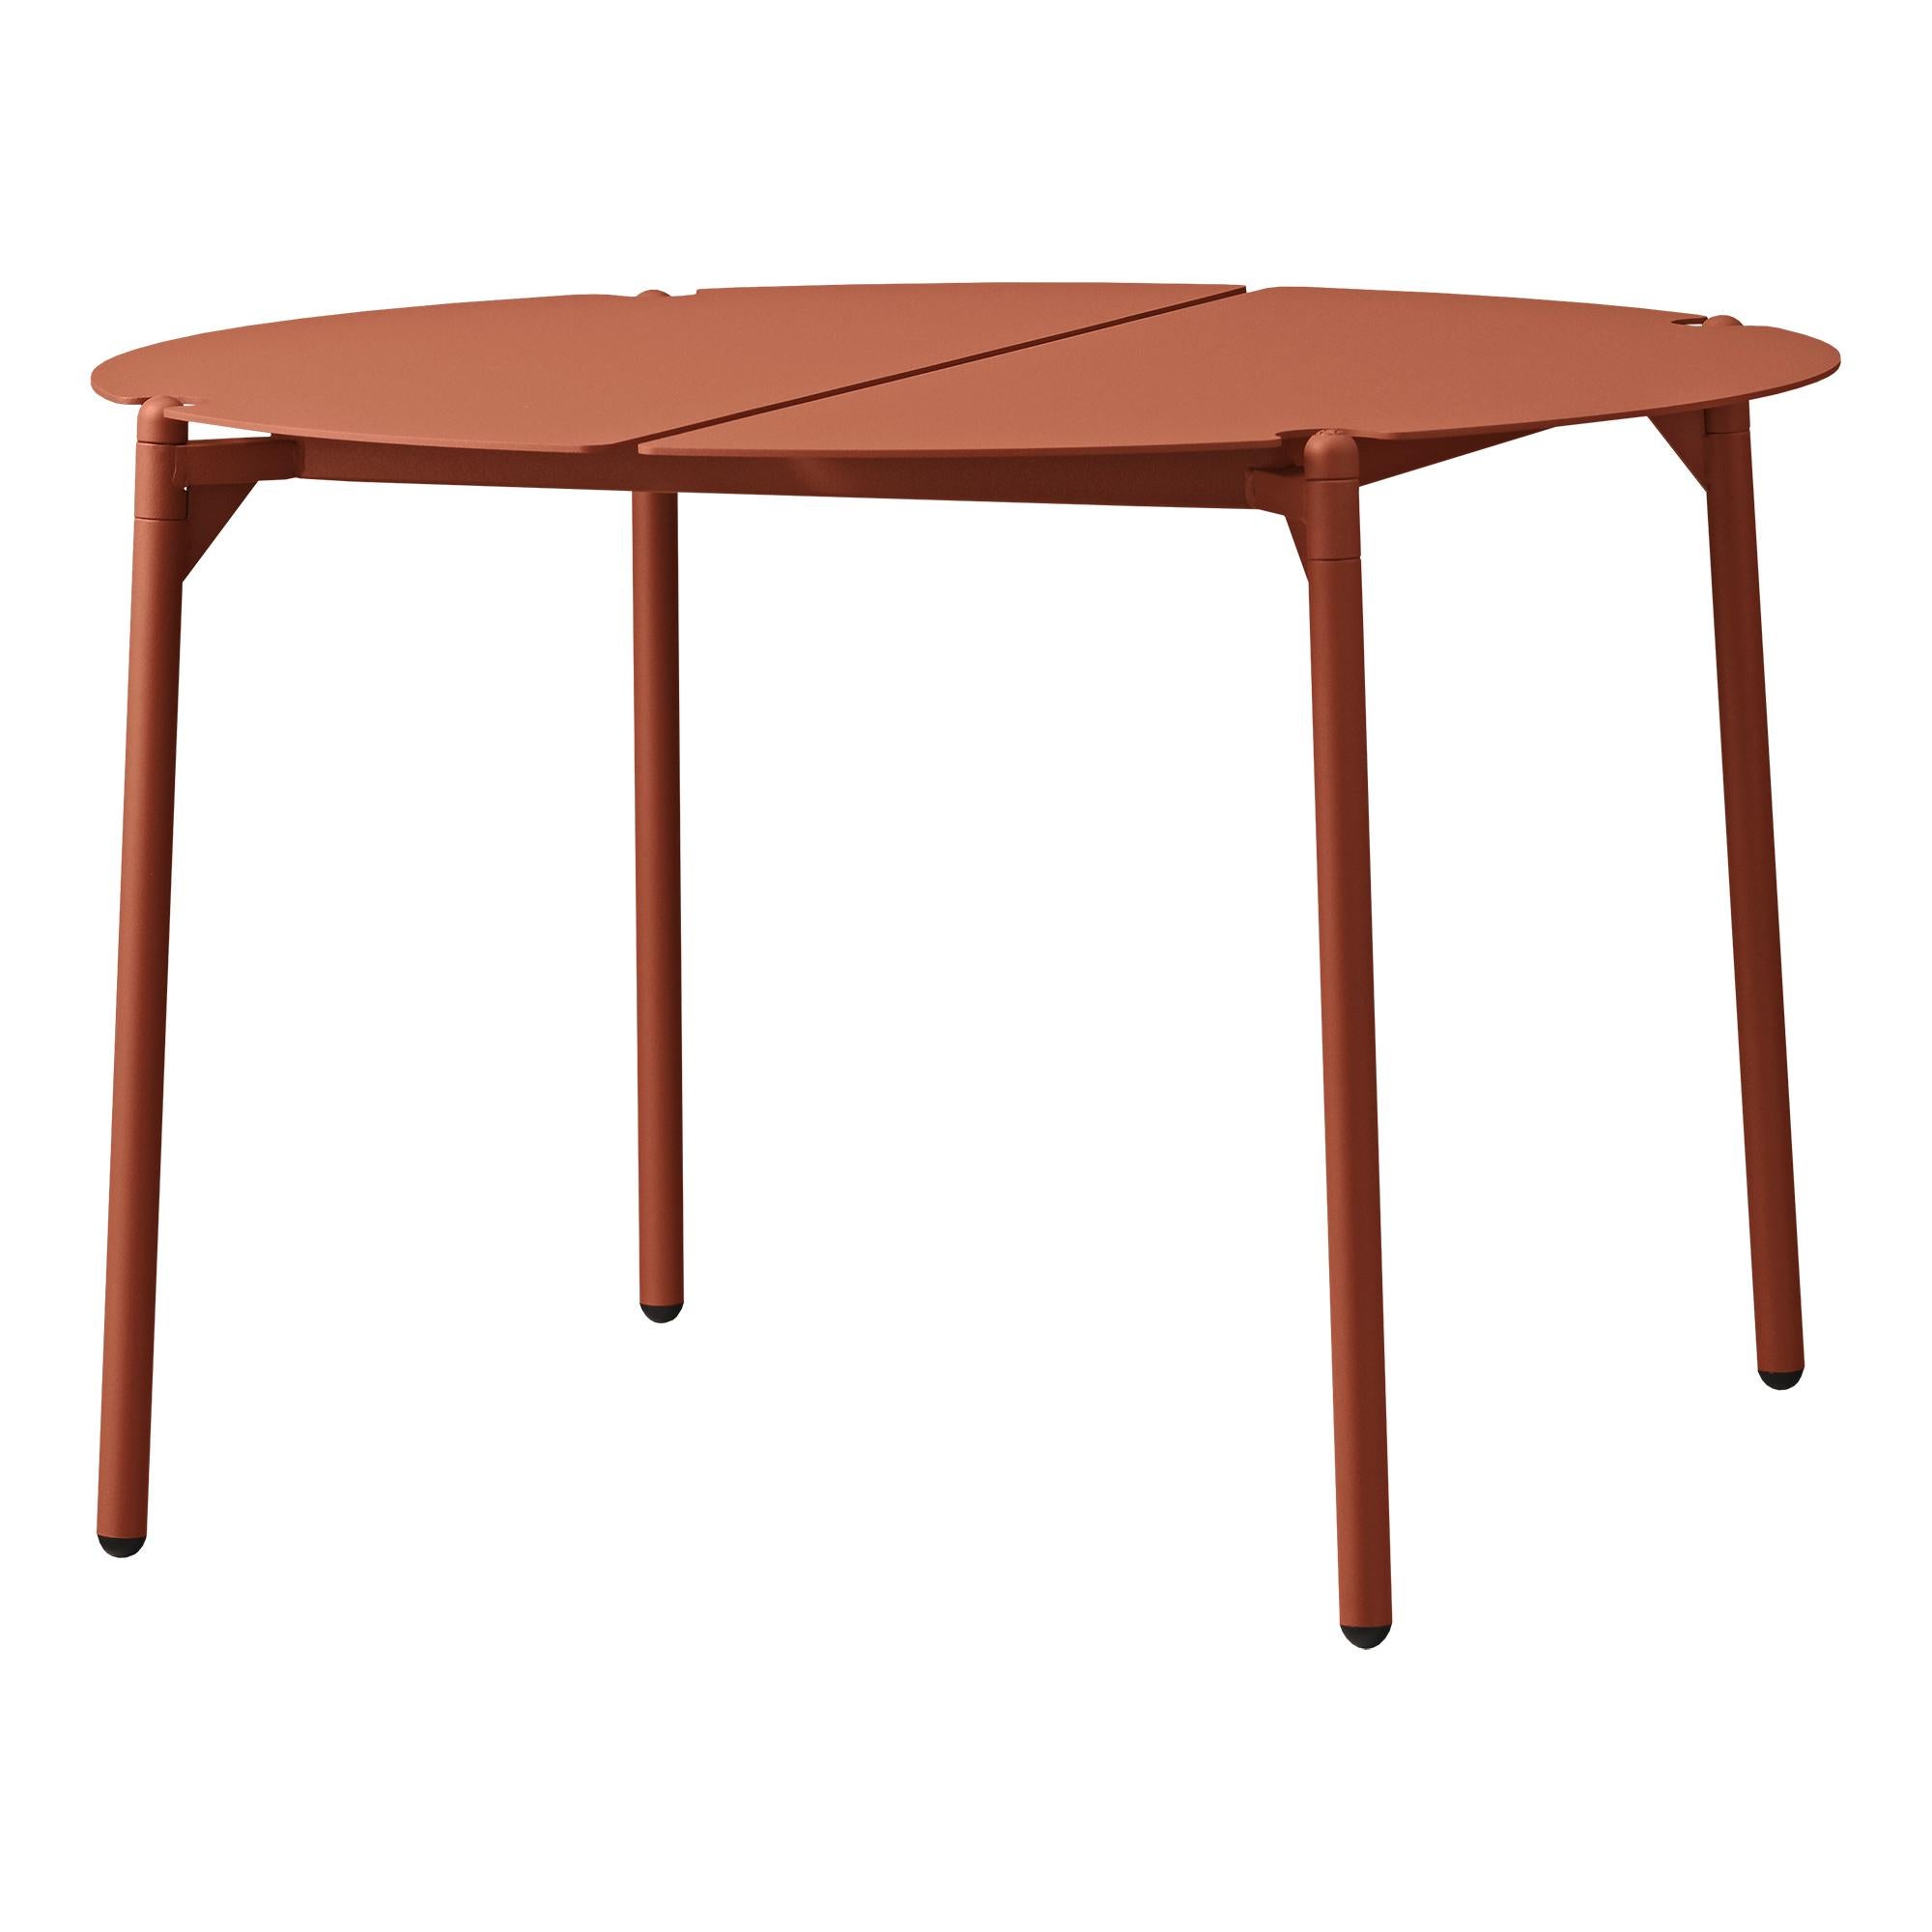 Large ginger bread minimalist lounge table
Dimensions: Diameter 70 x height 45 cm
Materials: Steel w. Matte powder coating & aluminum w. Matte powder coating.
Available in colors: Taupe, bordeaux, forest, ginger bread, black and, black and